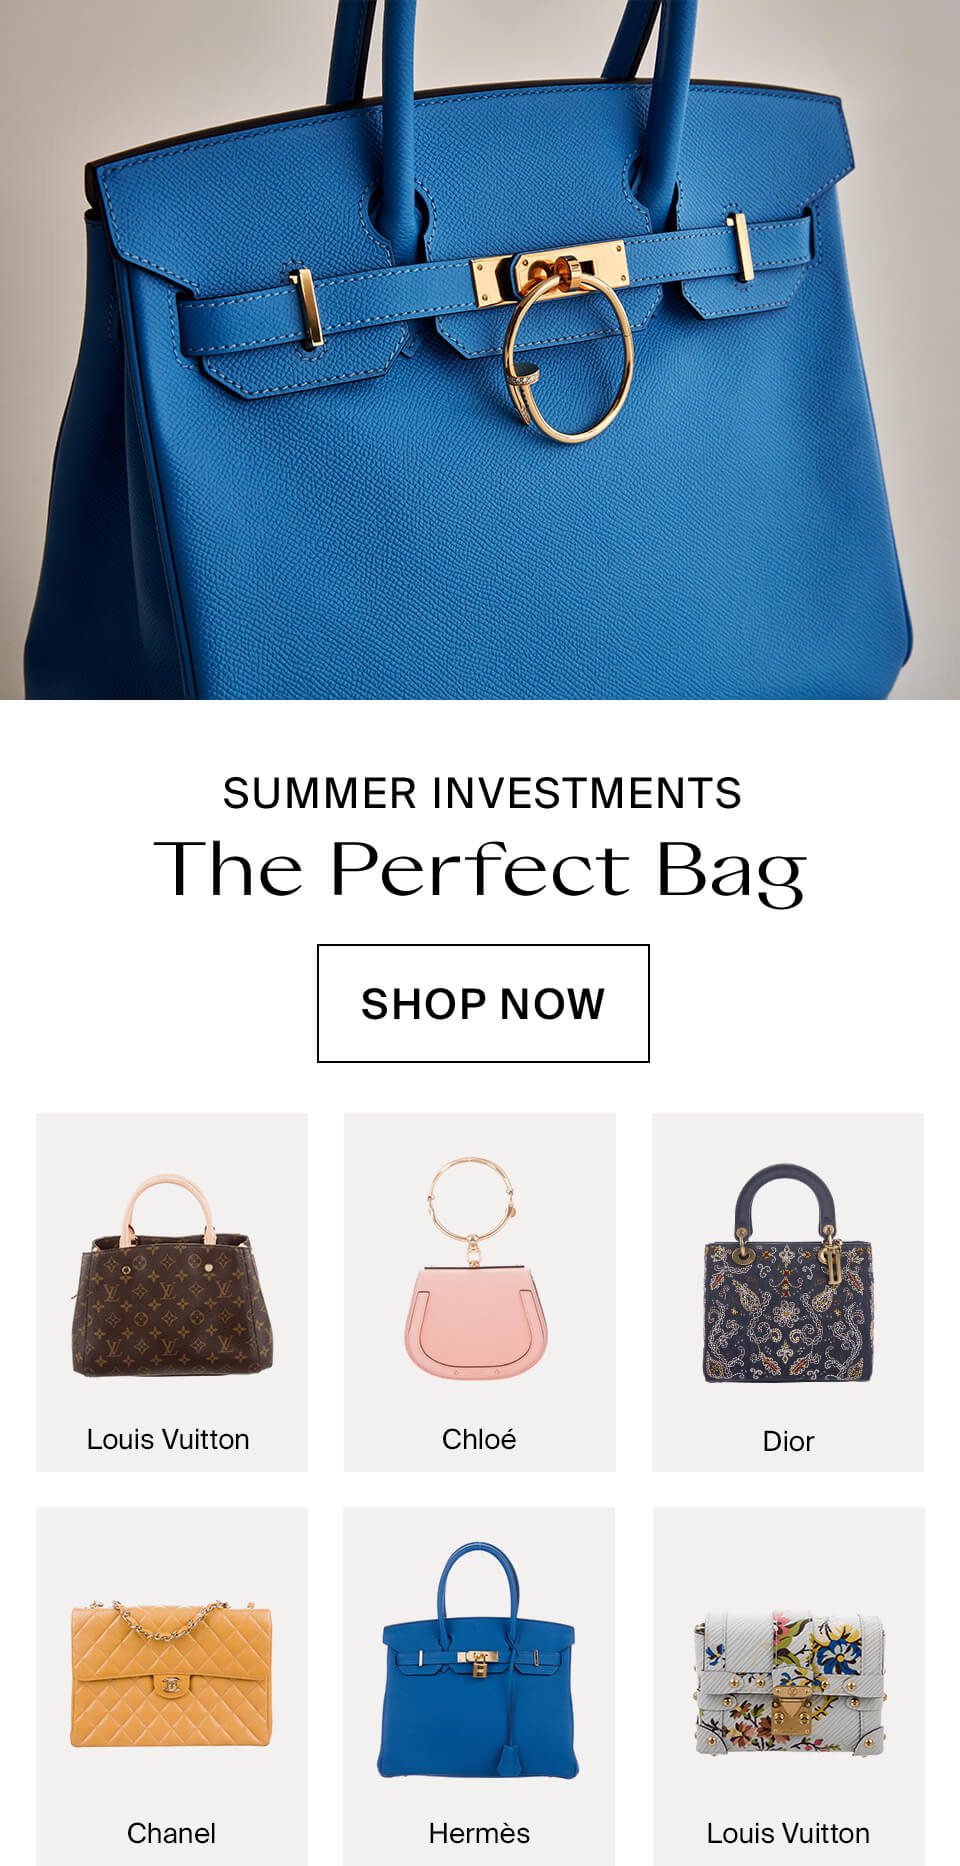 The Perfect Bag